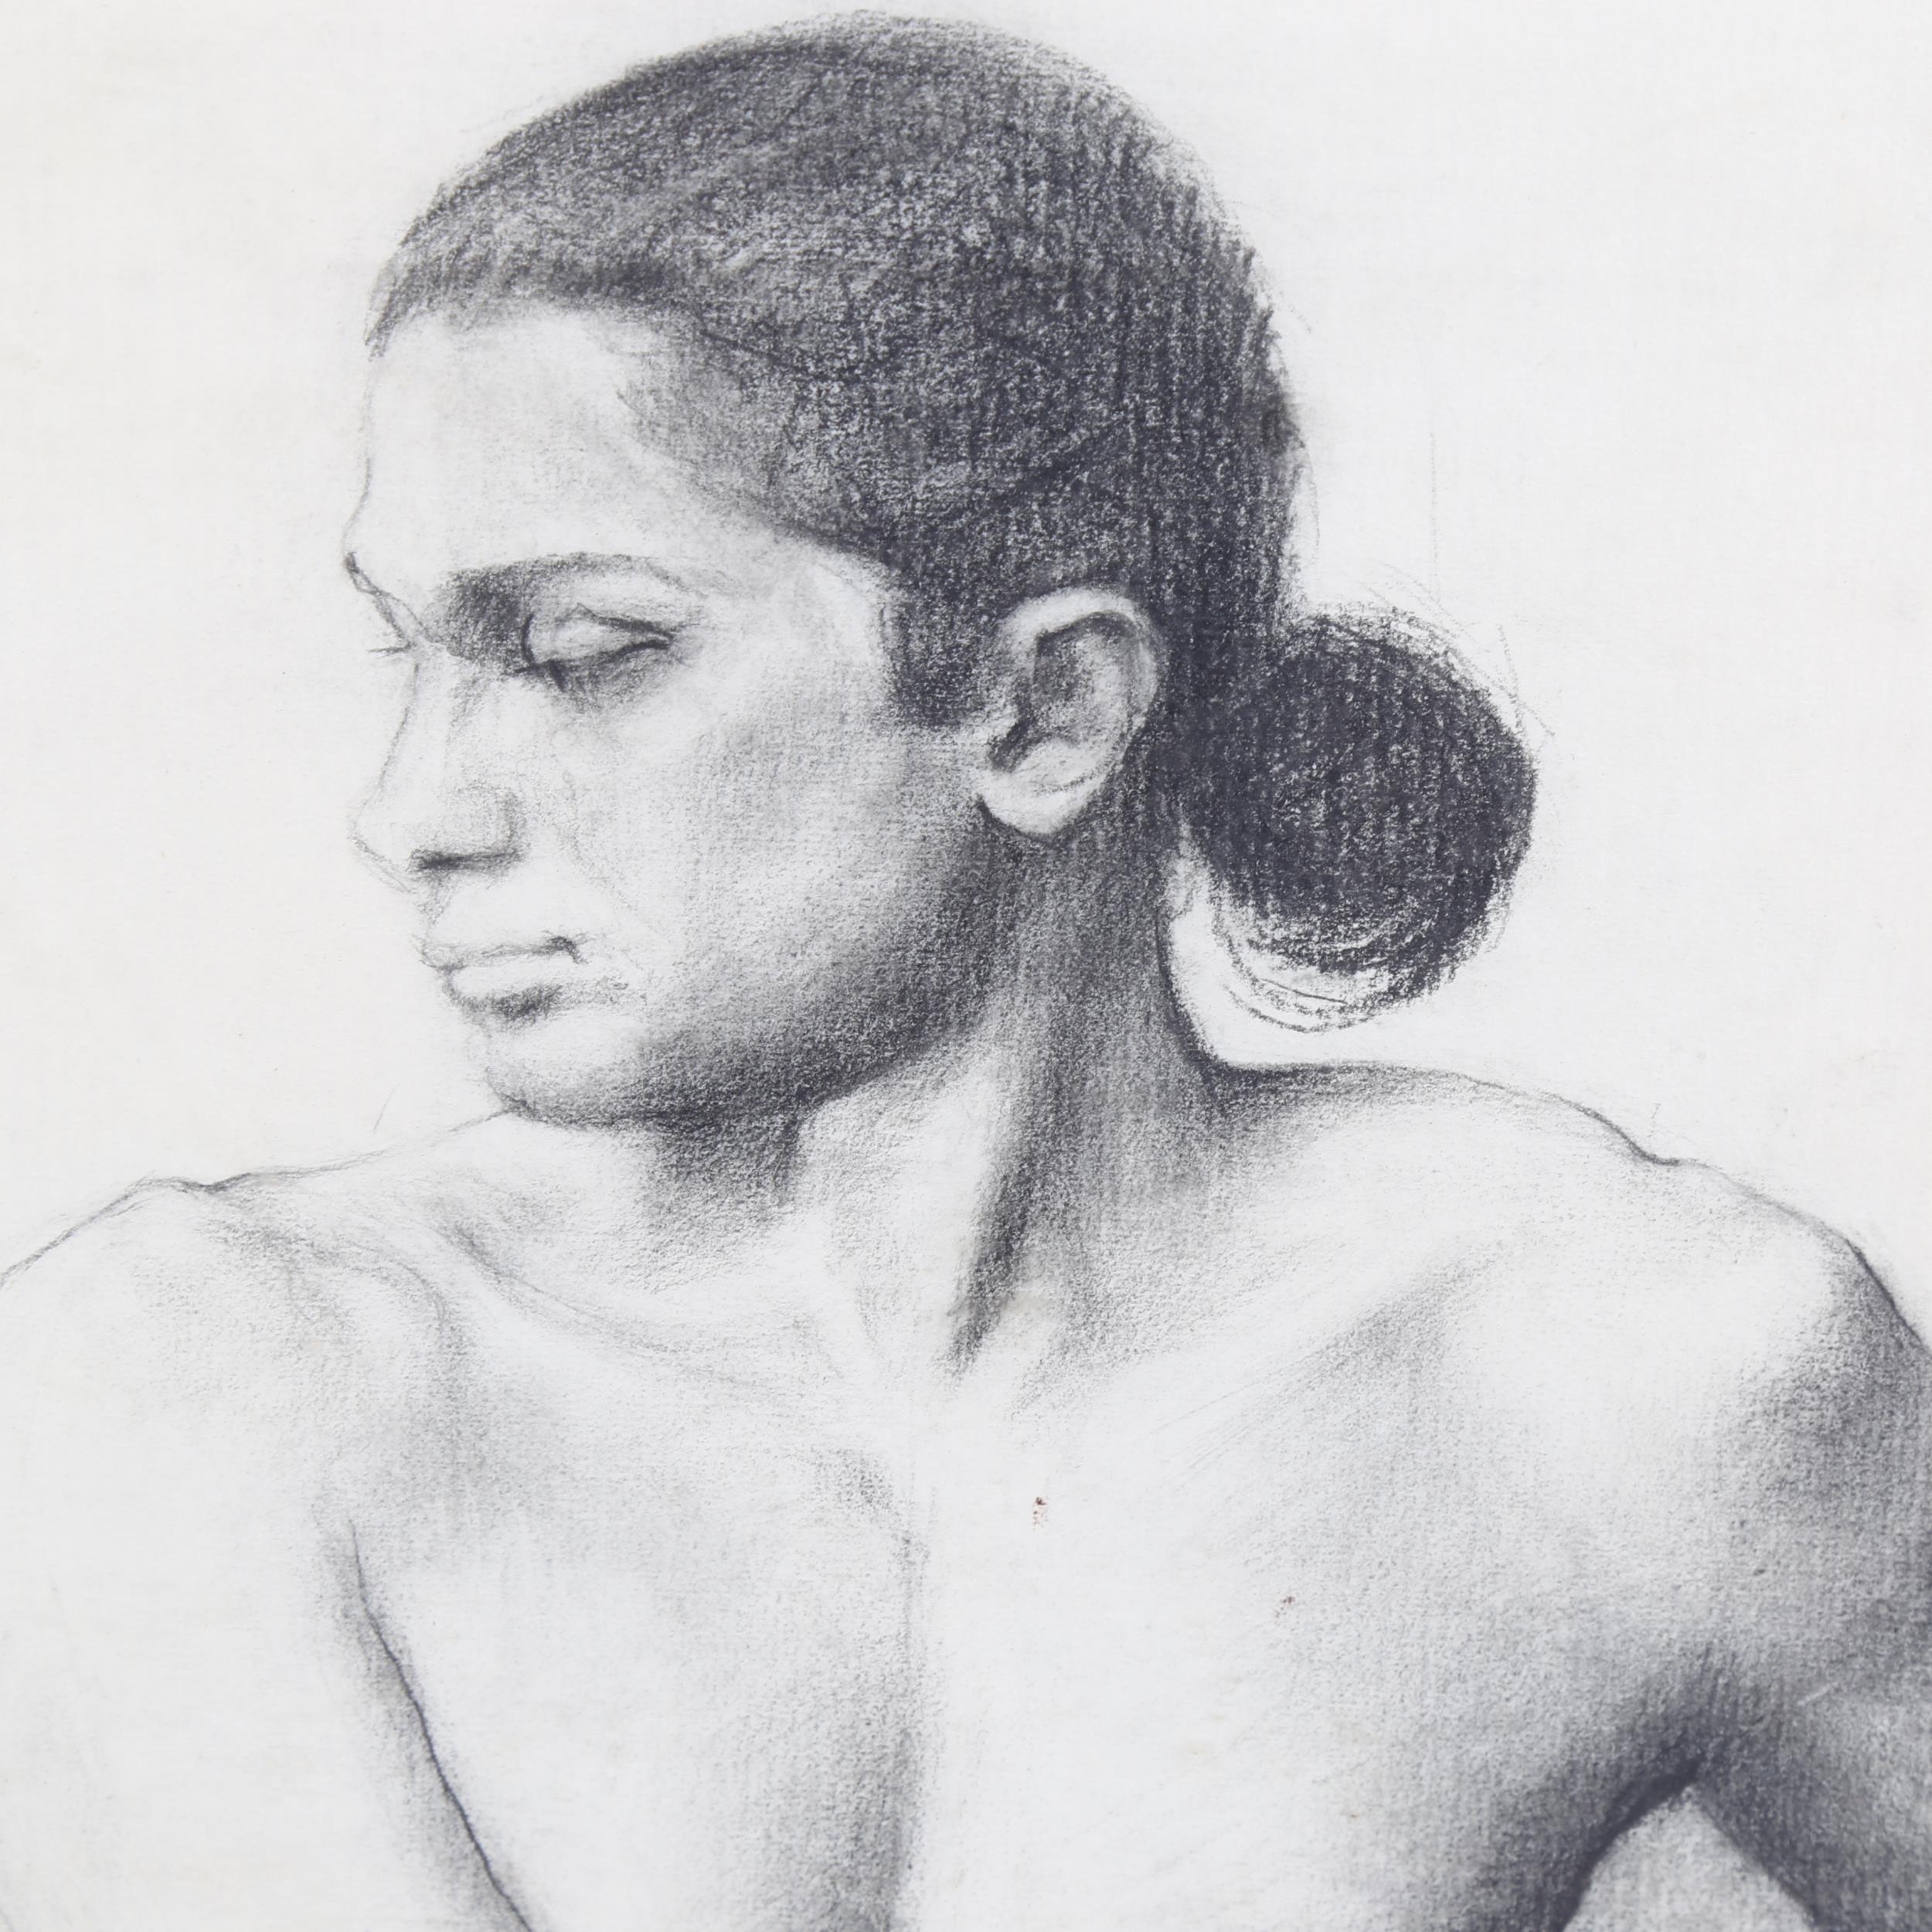 Really well executed male study
Charcoal on paper. Matted

Drawing in good order
Image 25